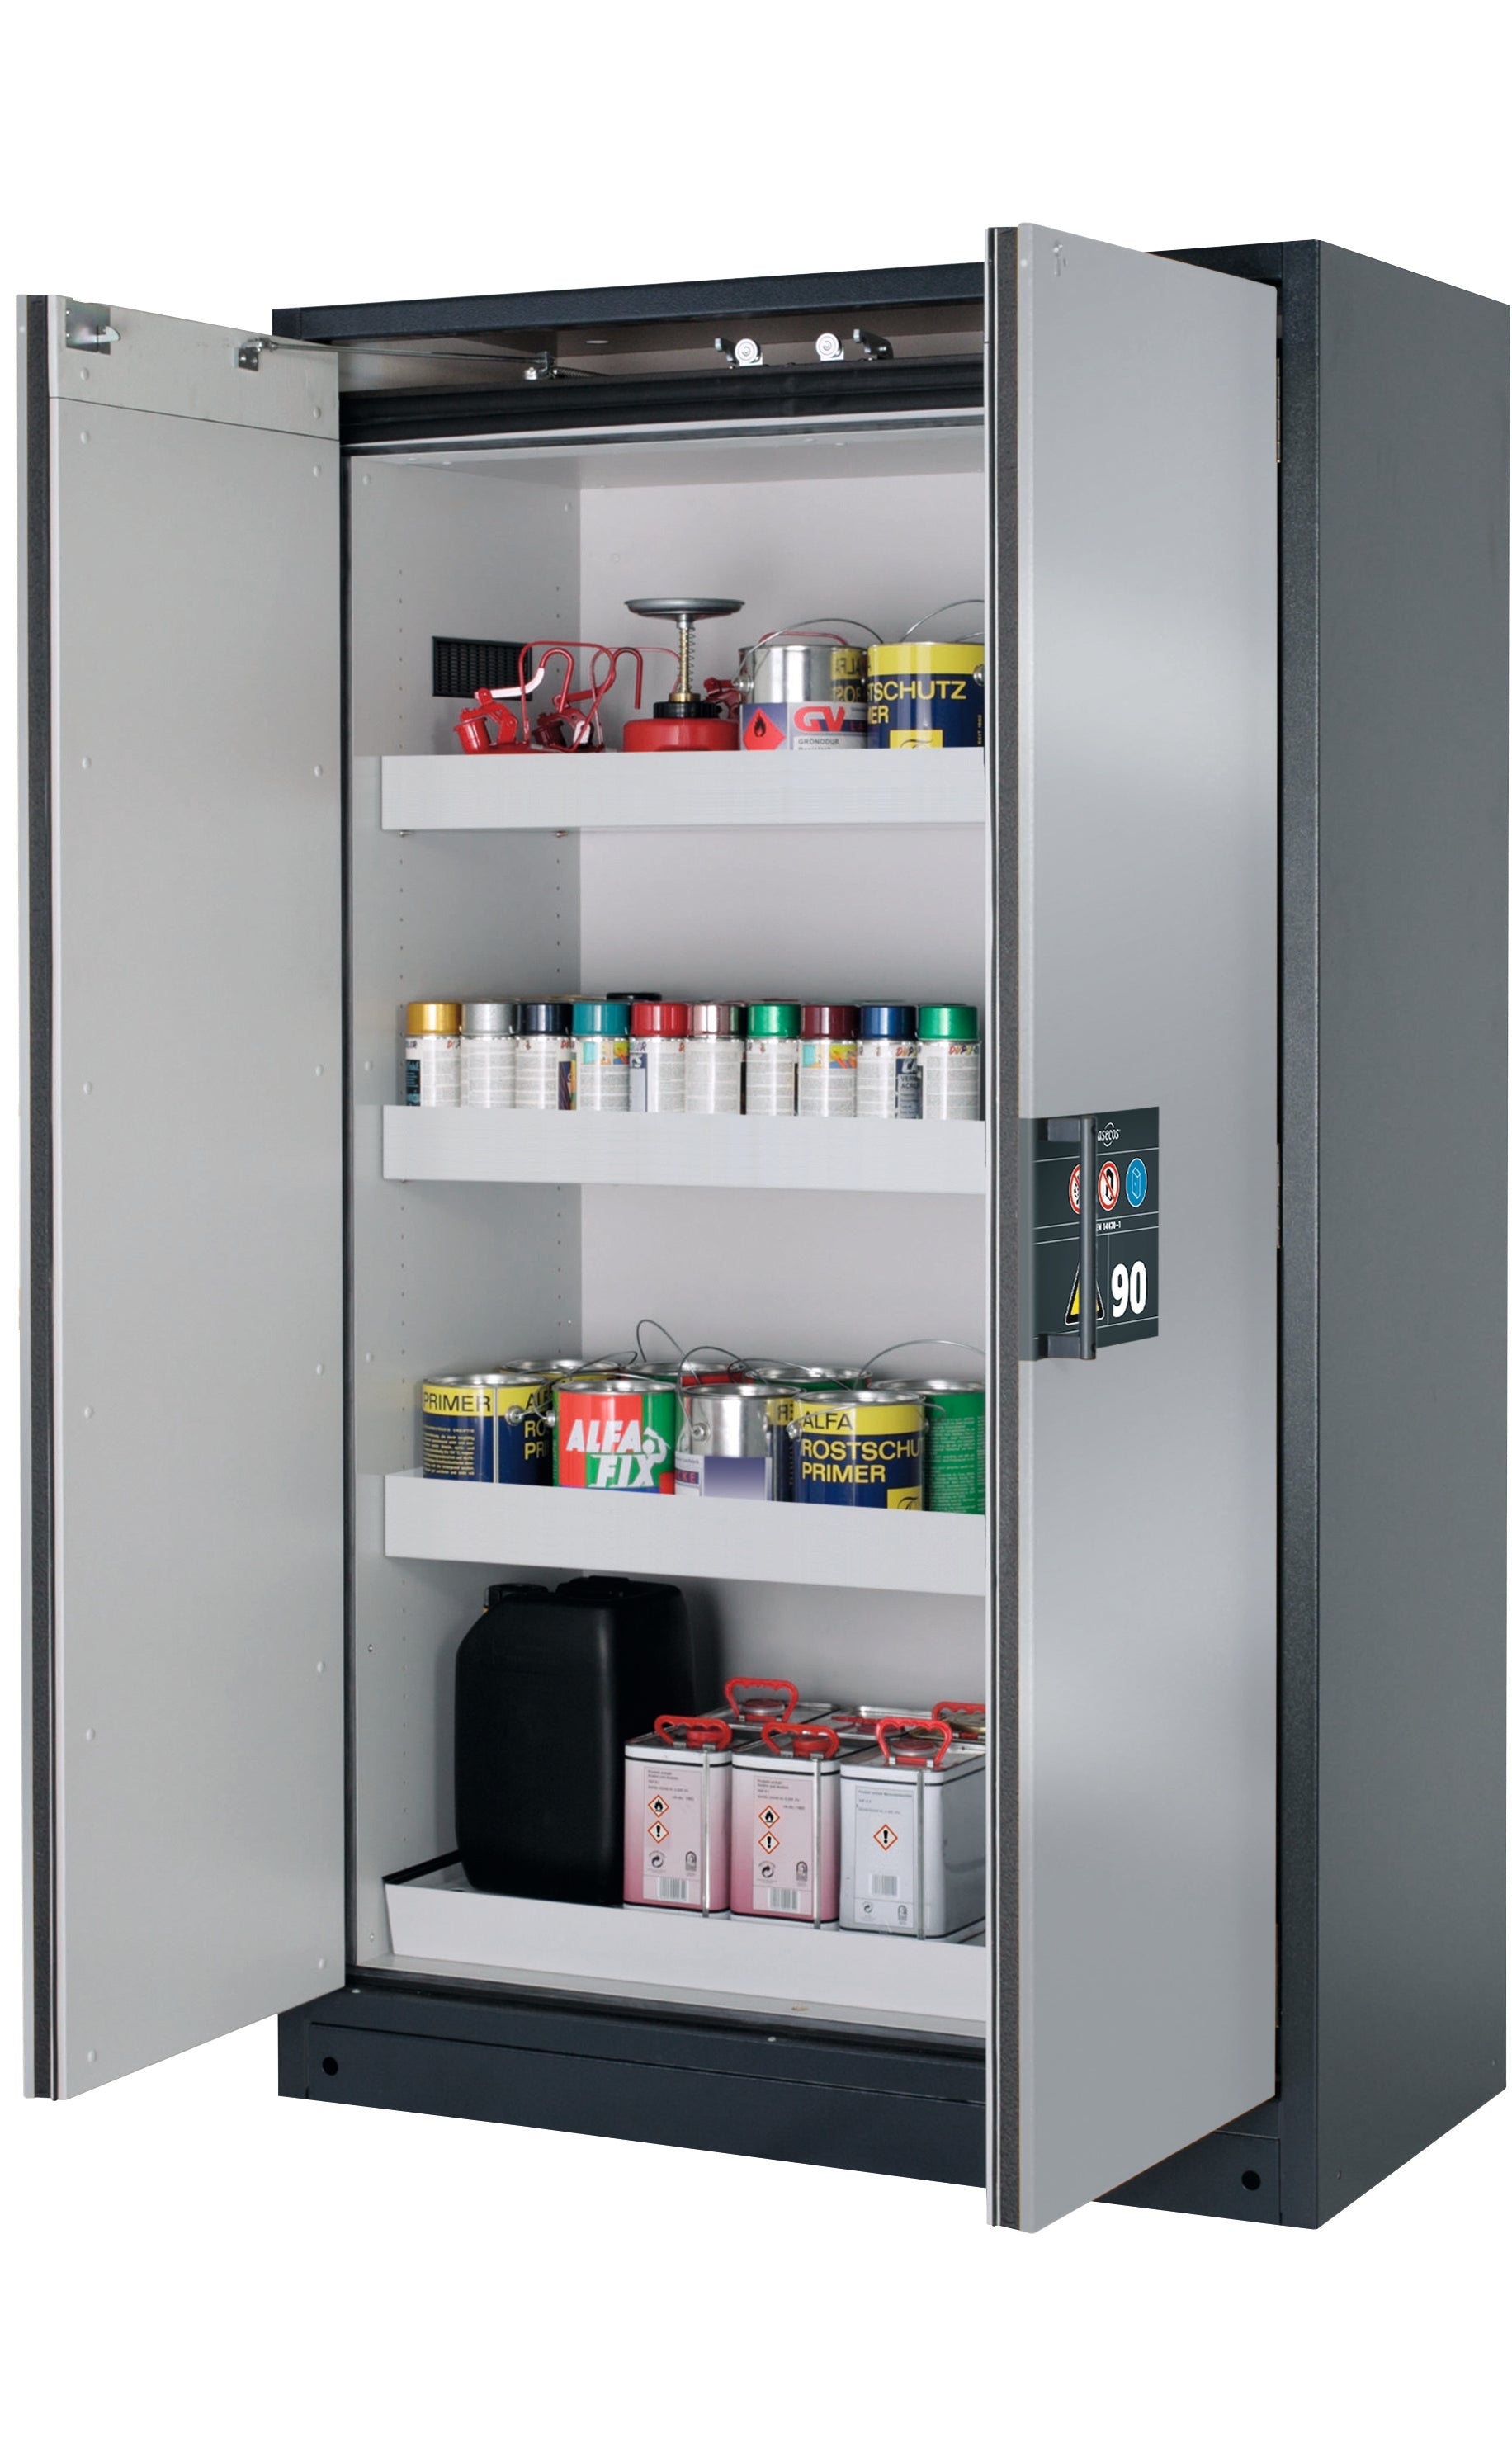 Type 90 safety storage cabinet Q-CLASSIC-90 model Q90.195.120 in asecos silver with 3x tray shelf (standard) (sheet steel),